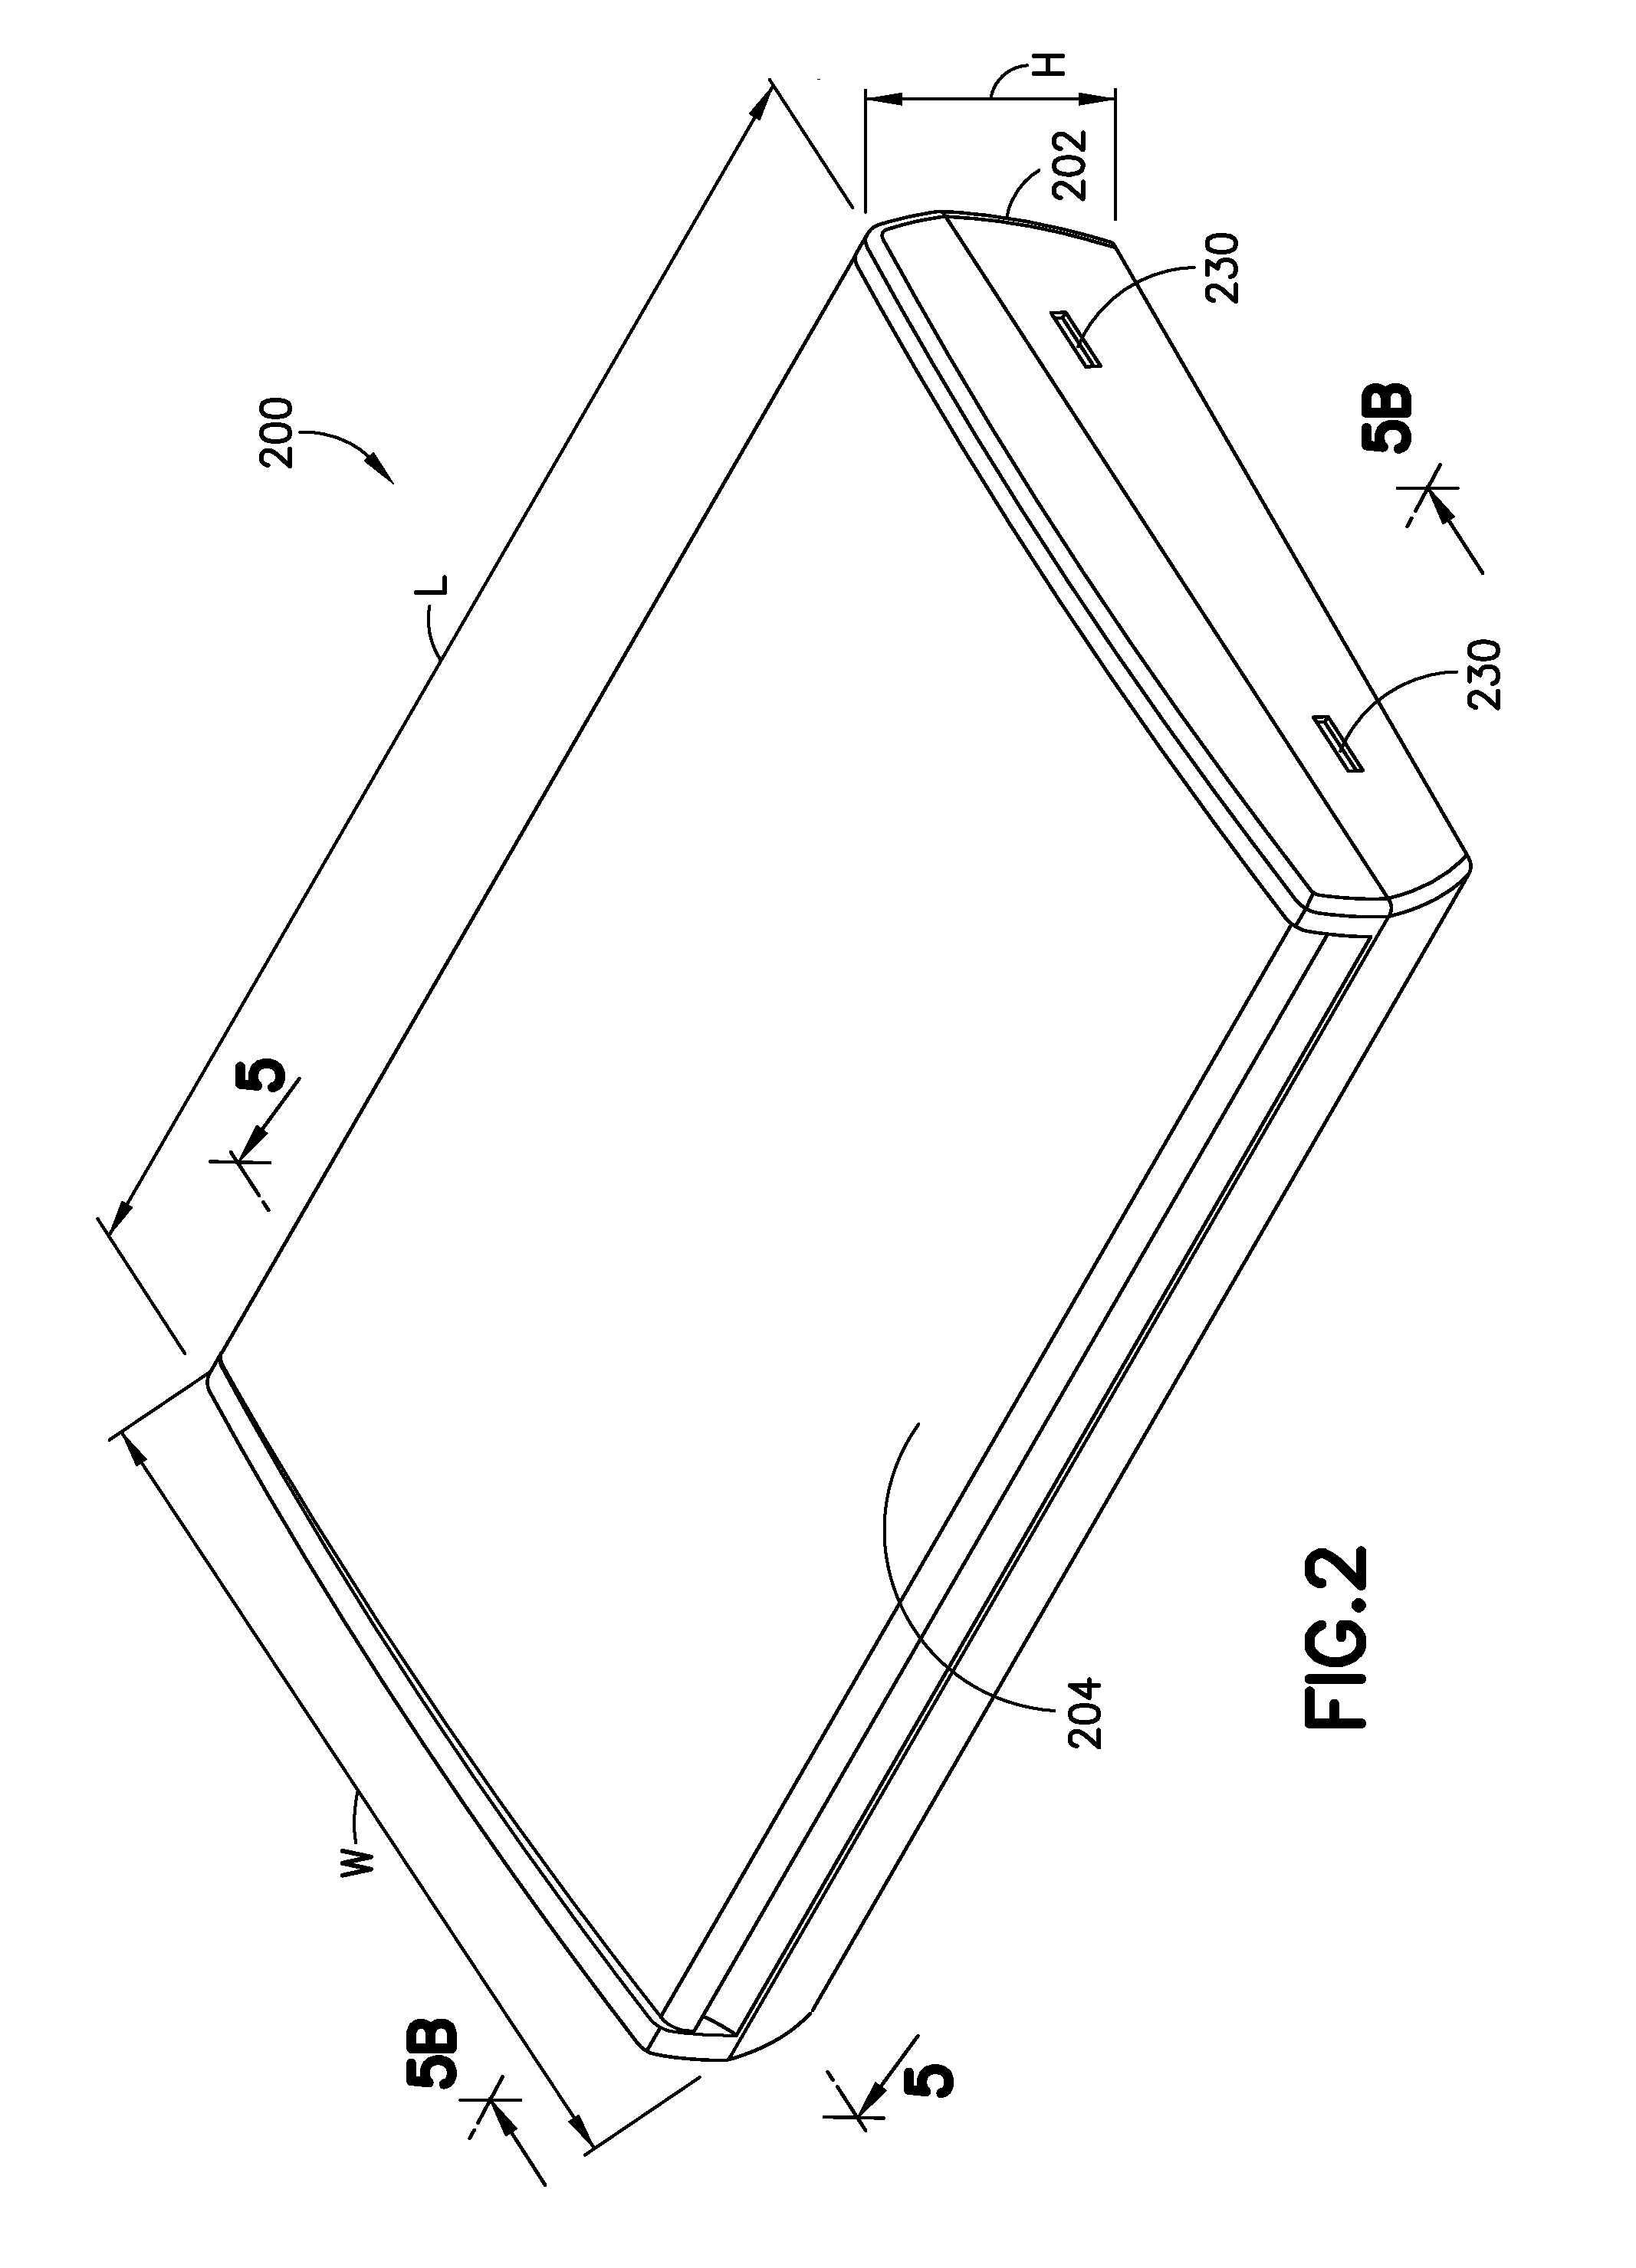 Apparatus and Associated Methods for Tracking and Increasing Medication Adherence for Patients